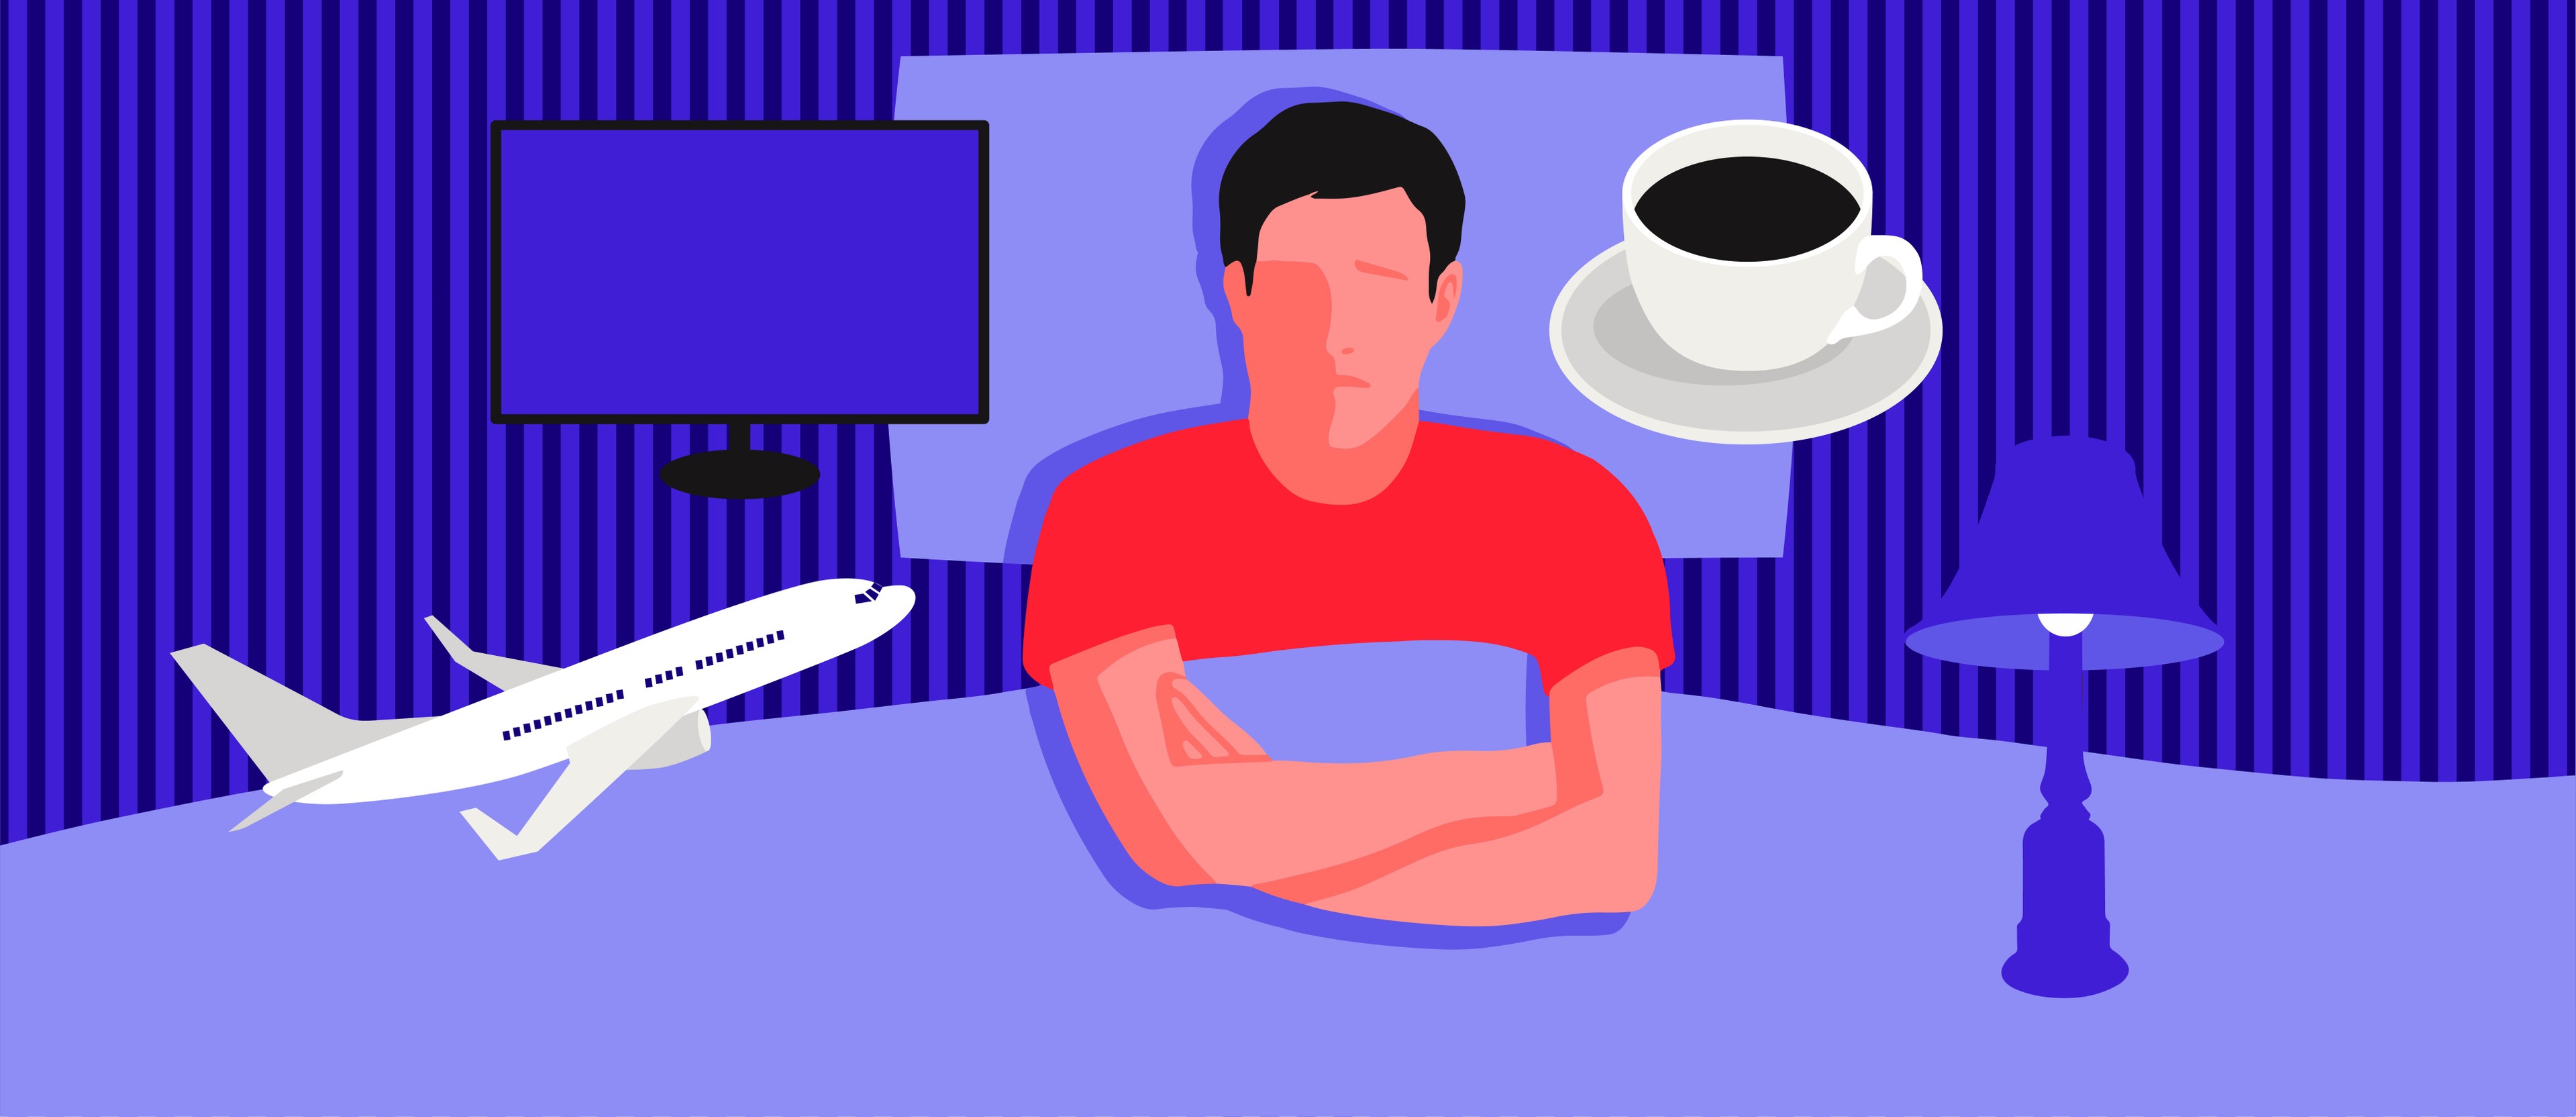 A man with insomnia lying awake in bed with a lamp, a cup of coffee, a TV and an airplane floating over his head.